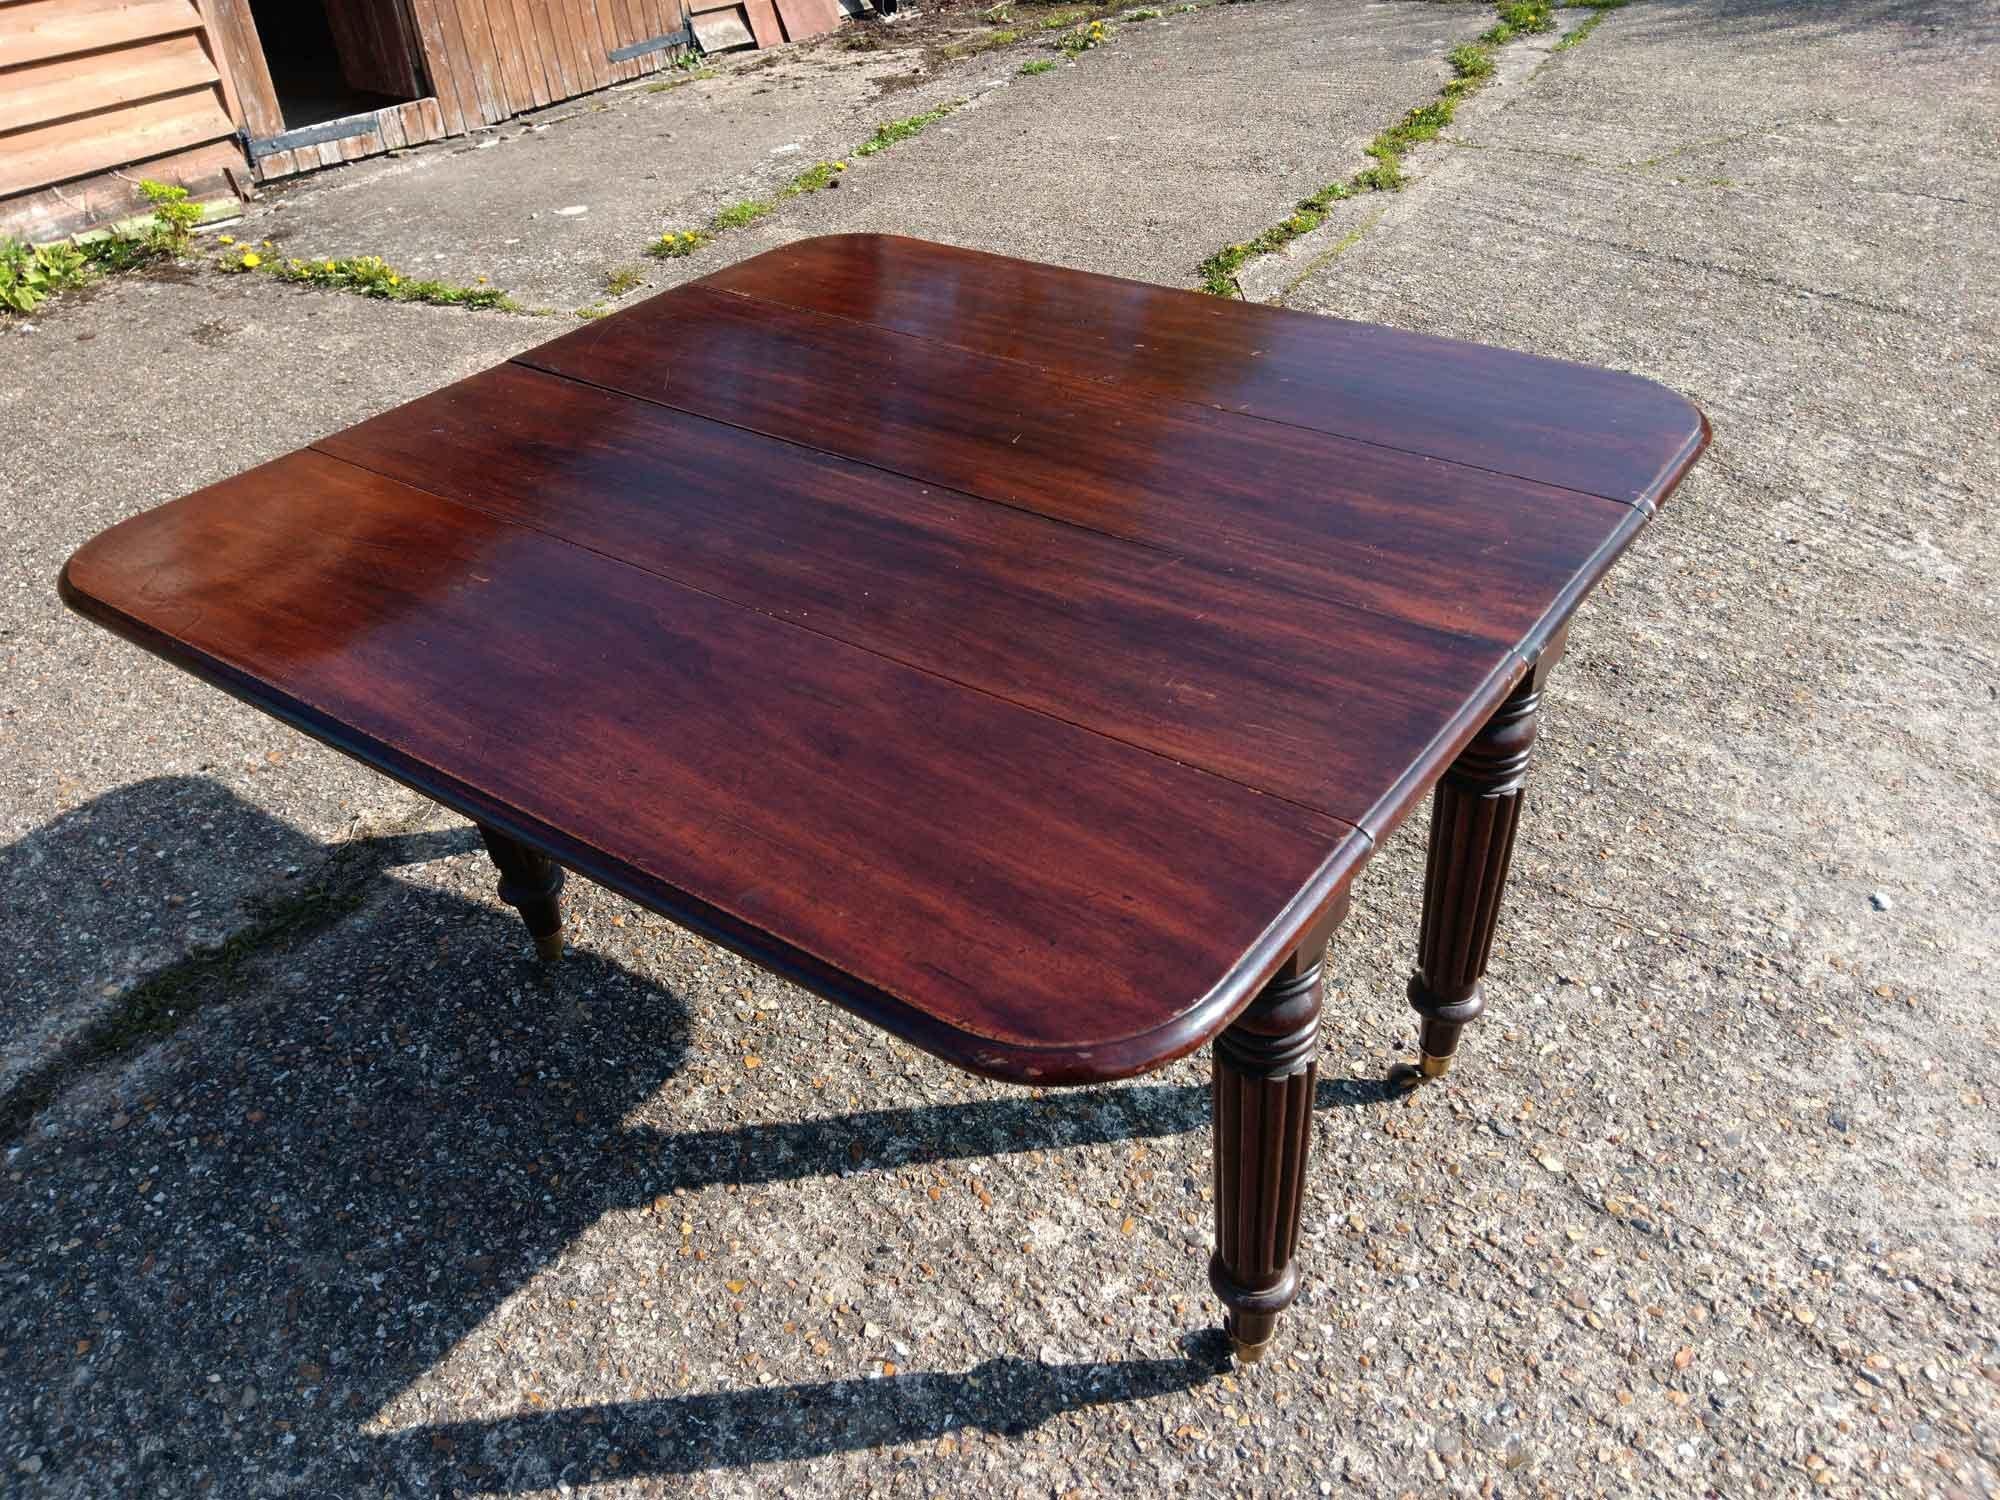 This Victorian table dates from about 1860. It is made of a rich close grain mahogany. This table can appear to be both dark and rich or a warm and golden colour depending on the light.

It is raised on 4 brass wheeled cup castors which are fitted